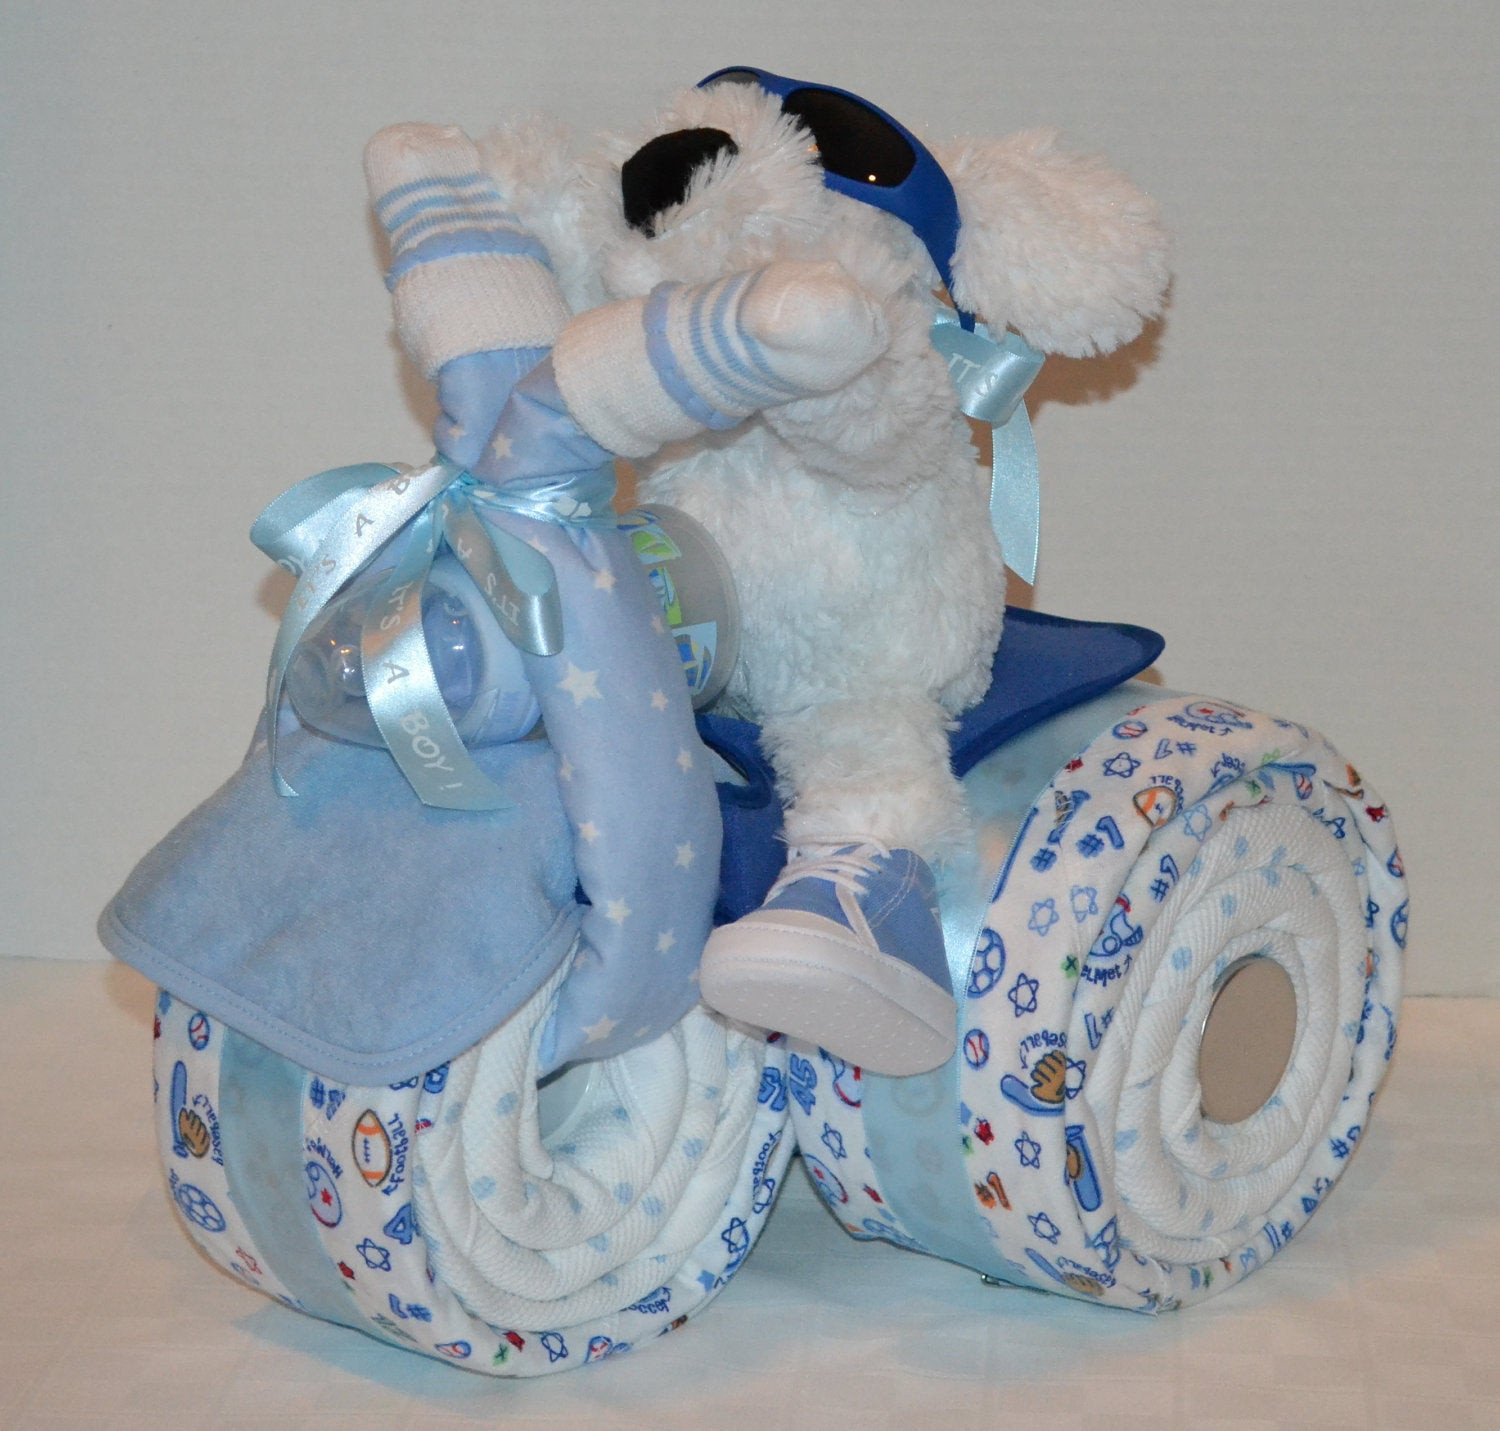 Unique Baby Shower Gift Ideas For Boy
 TRICYCLE DIAPER CAKE FOR BOY INSTRUCTIONS